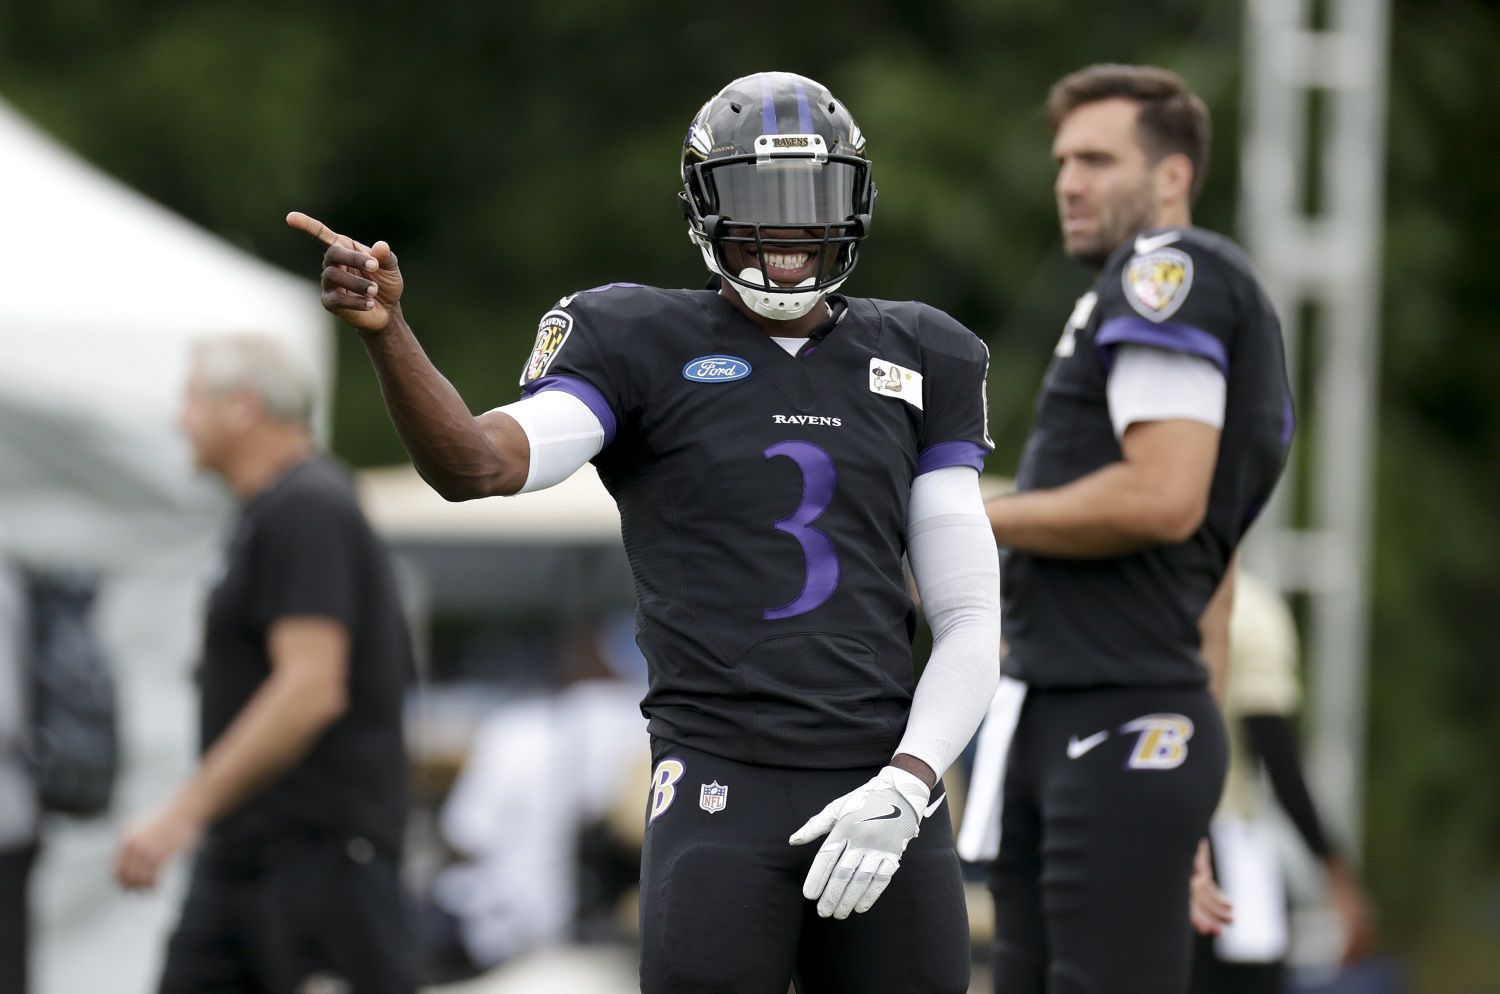 Baltimore Ravens quarterback Robert Griffin III (3) laughs during a joint practice with the at the Indianapolis Colts NFL football training camp in Westfield, Ind., Friday, Aug. 17, 2018. (AP Photo/Michael Conroy)